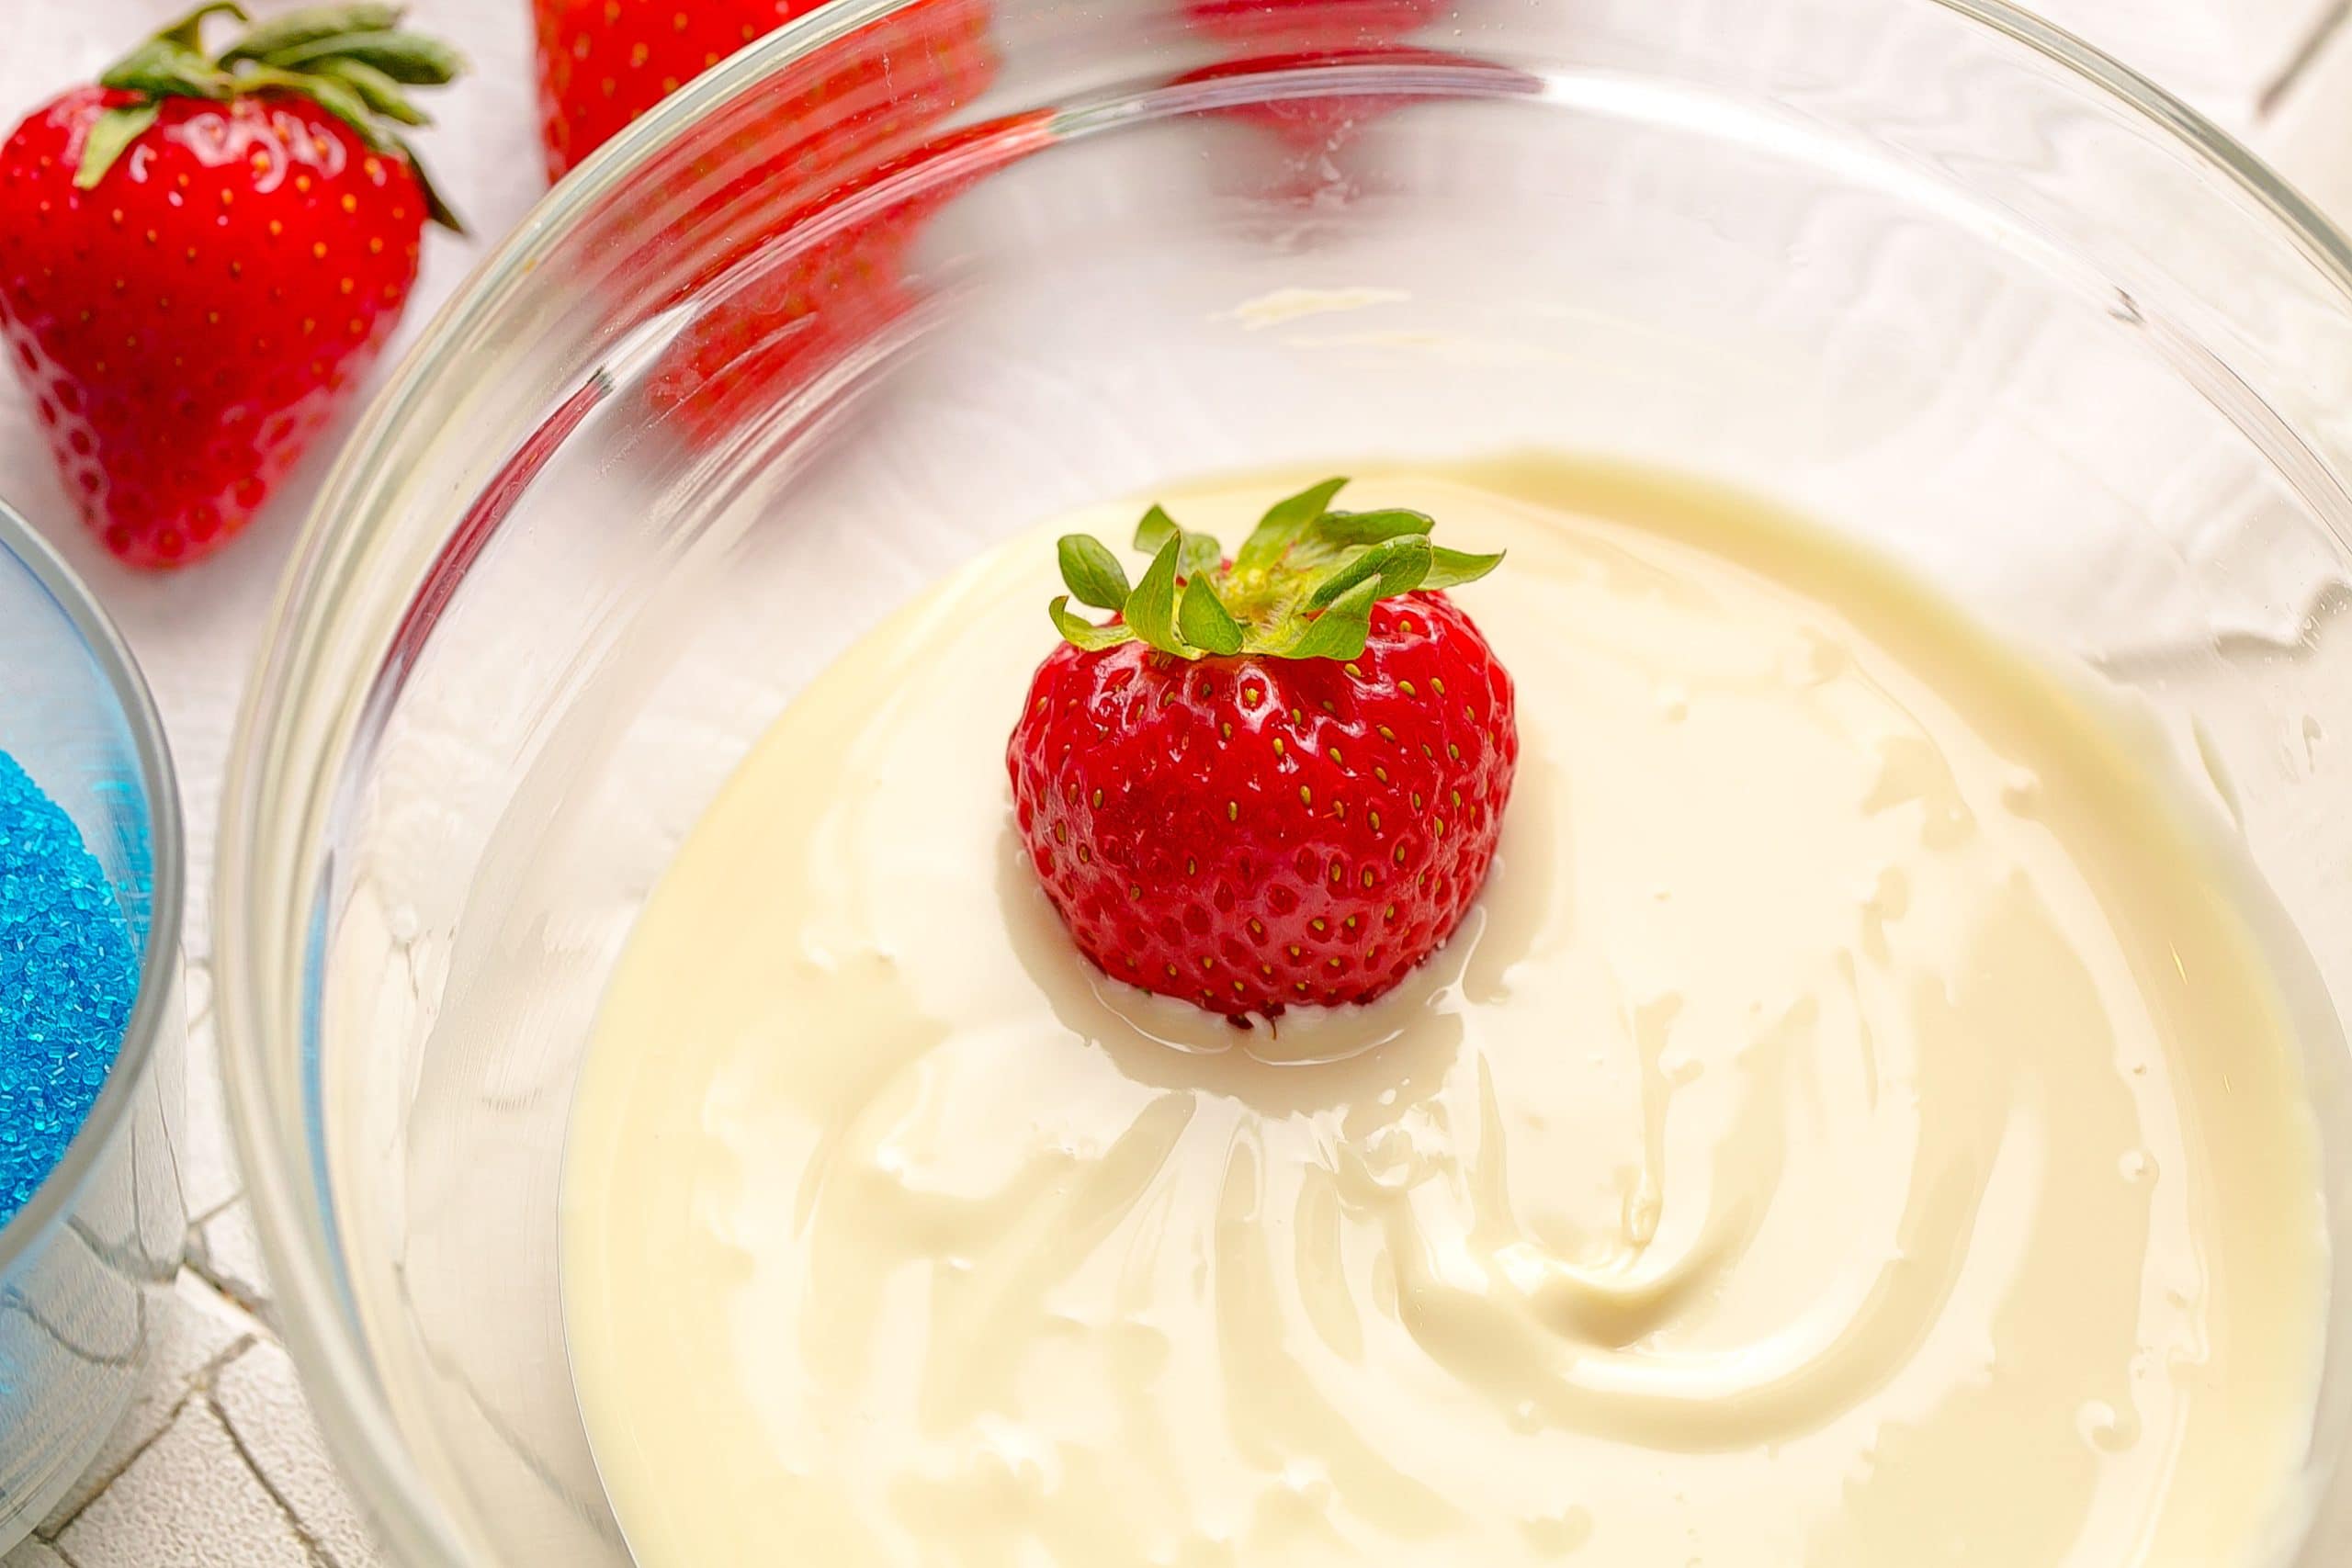 Strawberry in a bowl of melted white chocolate.